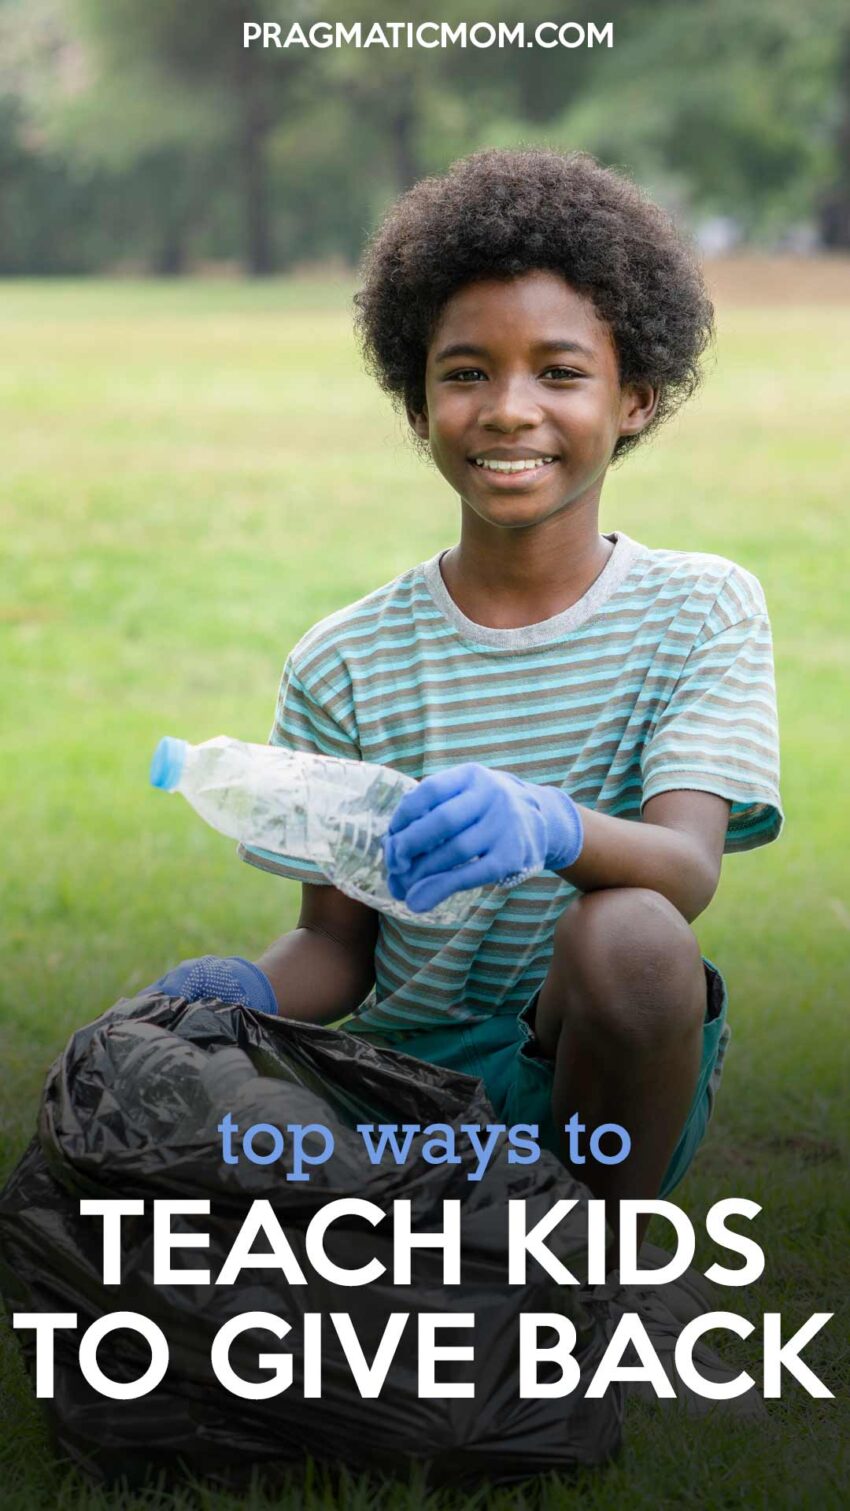 Top Ways to Teach Kids to Give Back